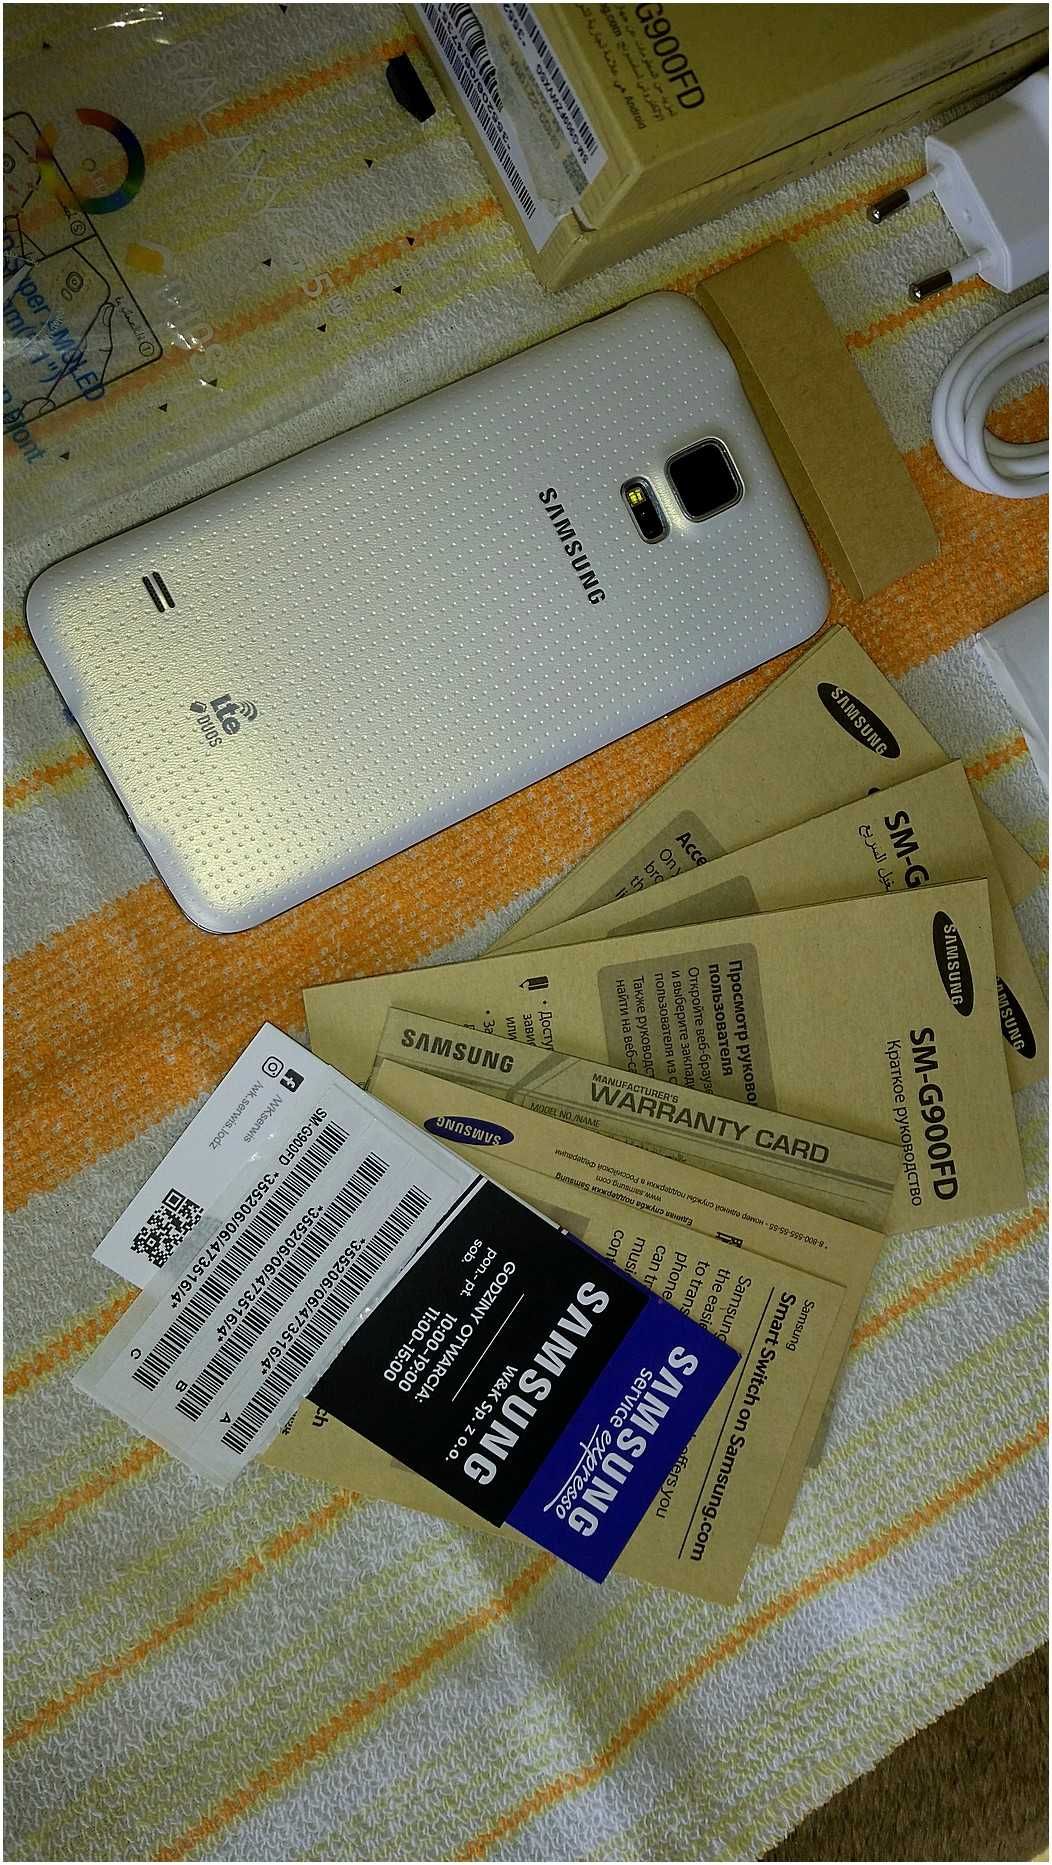 | Samsung Galaxy S5 Duos Dual | 4G LTE | SM-G900FD | Shimmery White  |